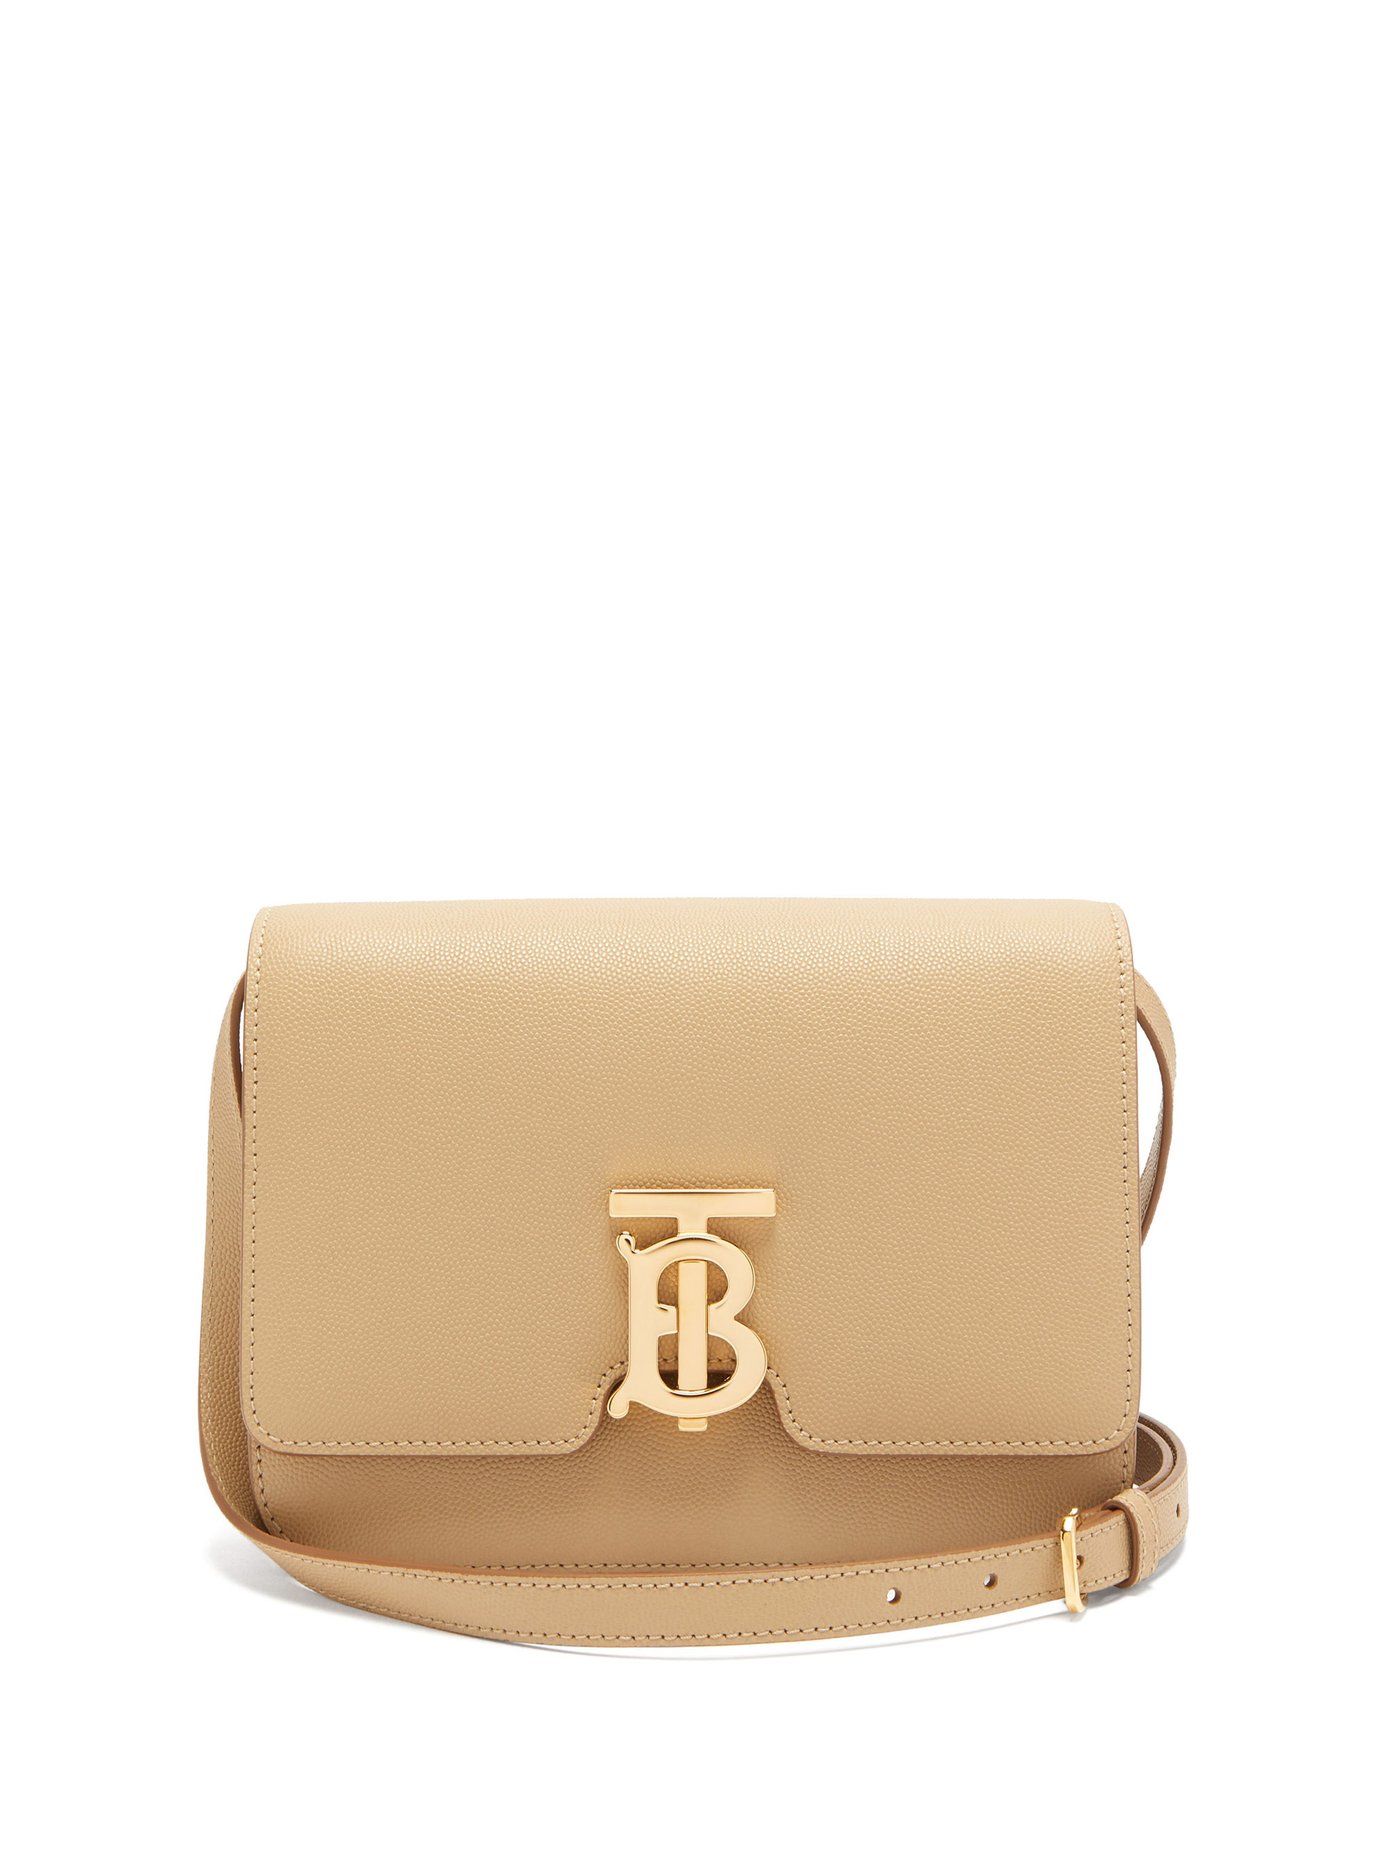 TB monogram small grained-leather cross 